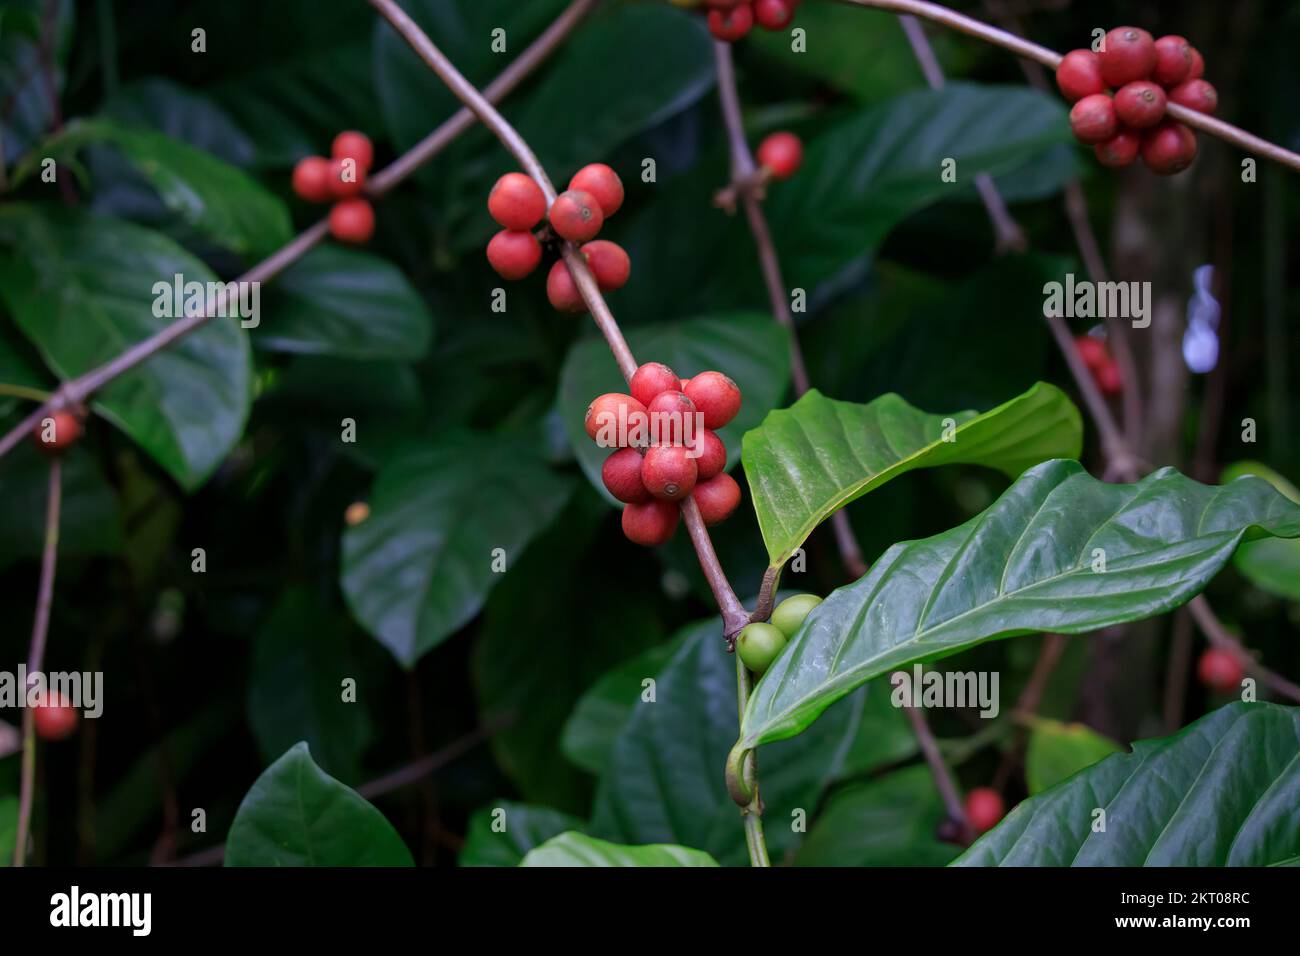 red Robusta coffee on a tree Stock Photo